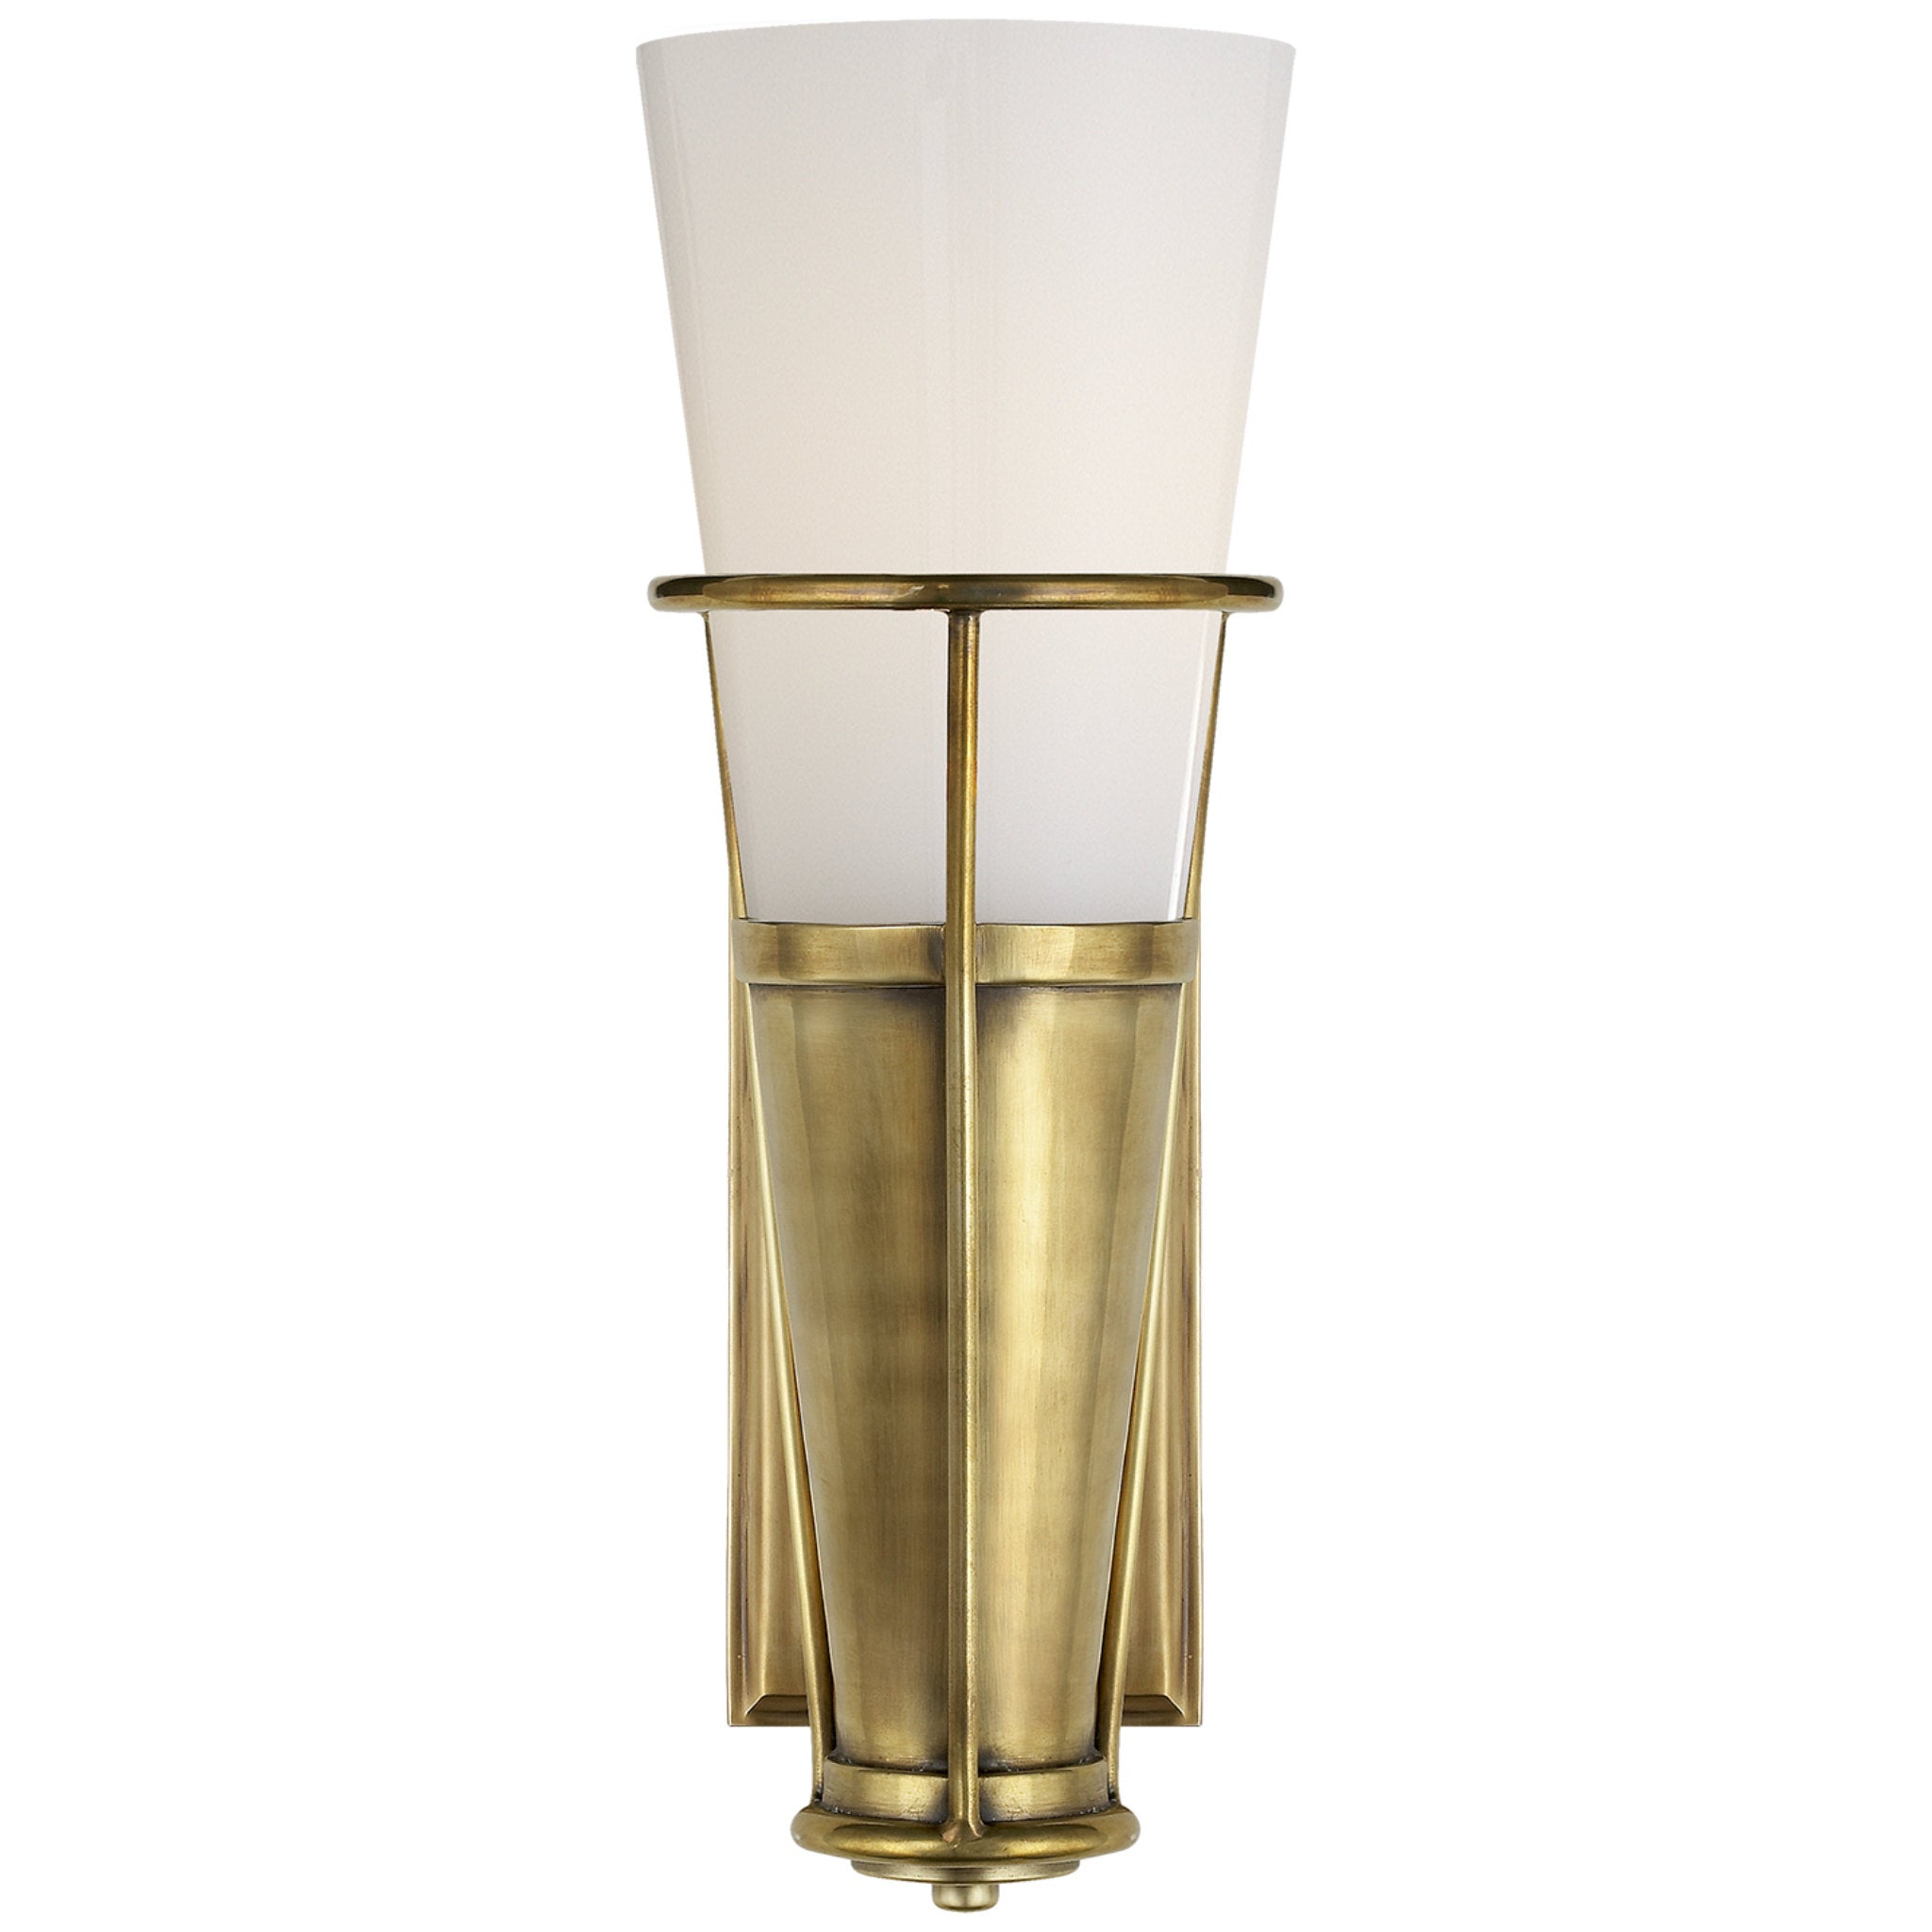 Thomas O'Brien Robinson Single Sconce in Hand-Rubbed Antique Brass with White Glass